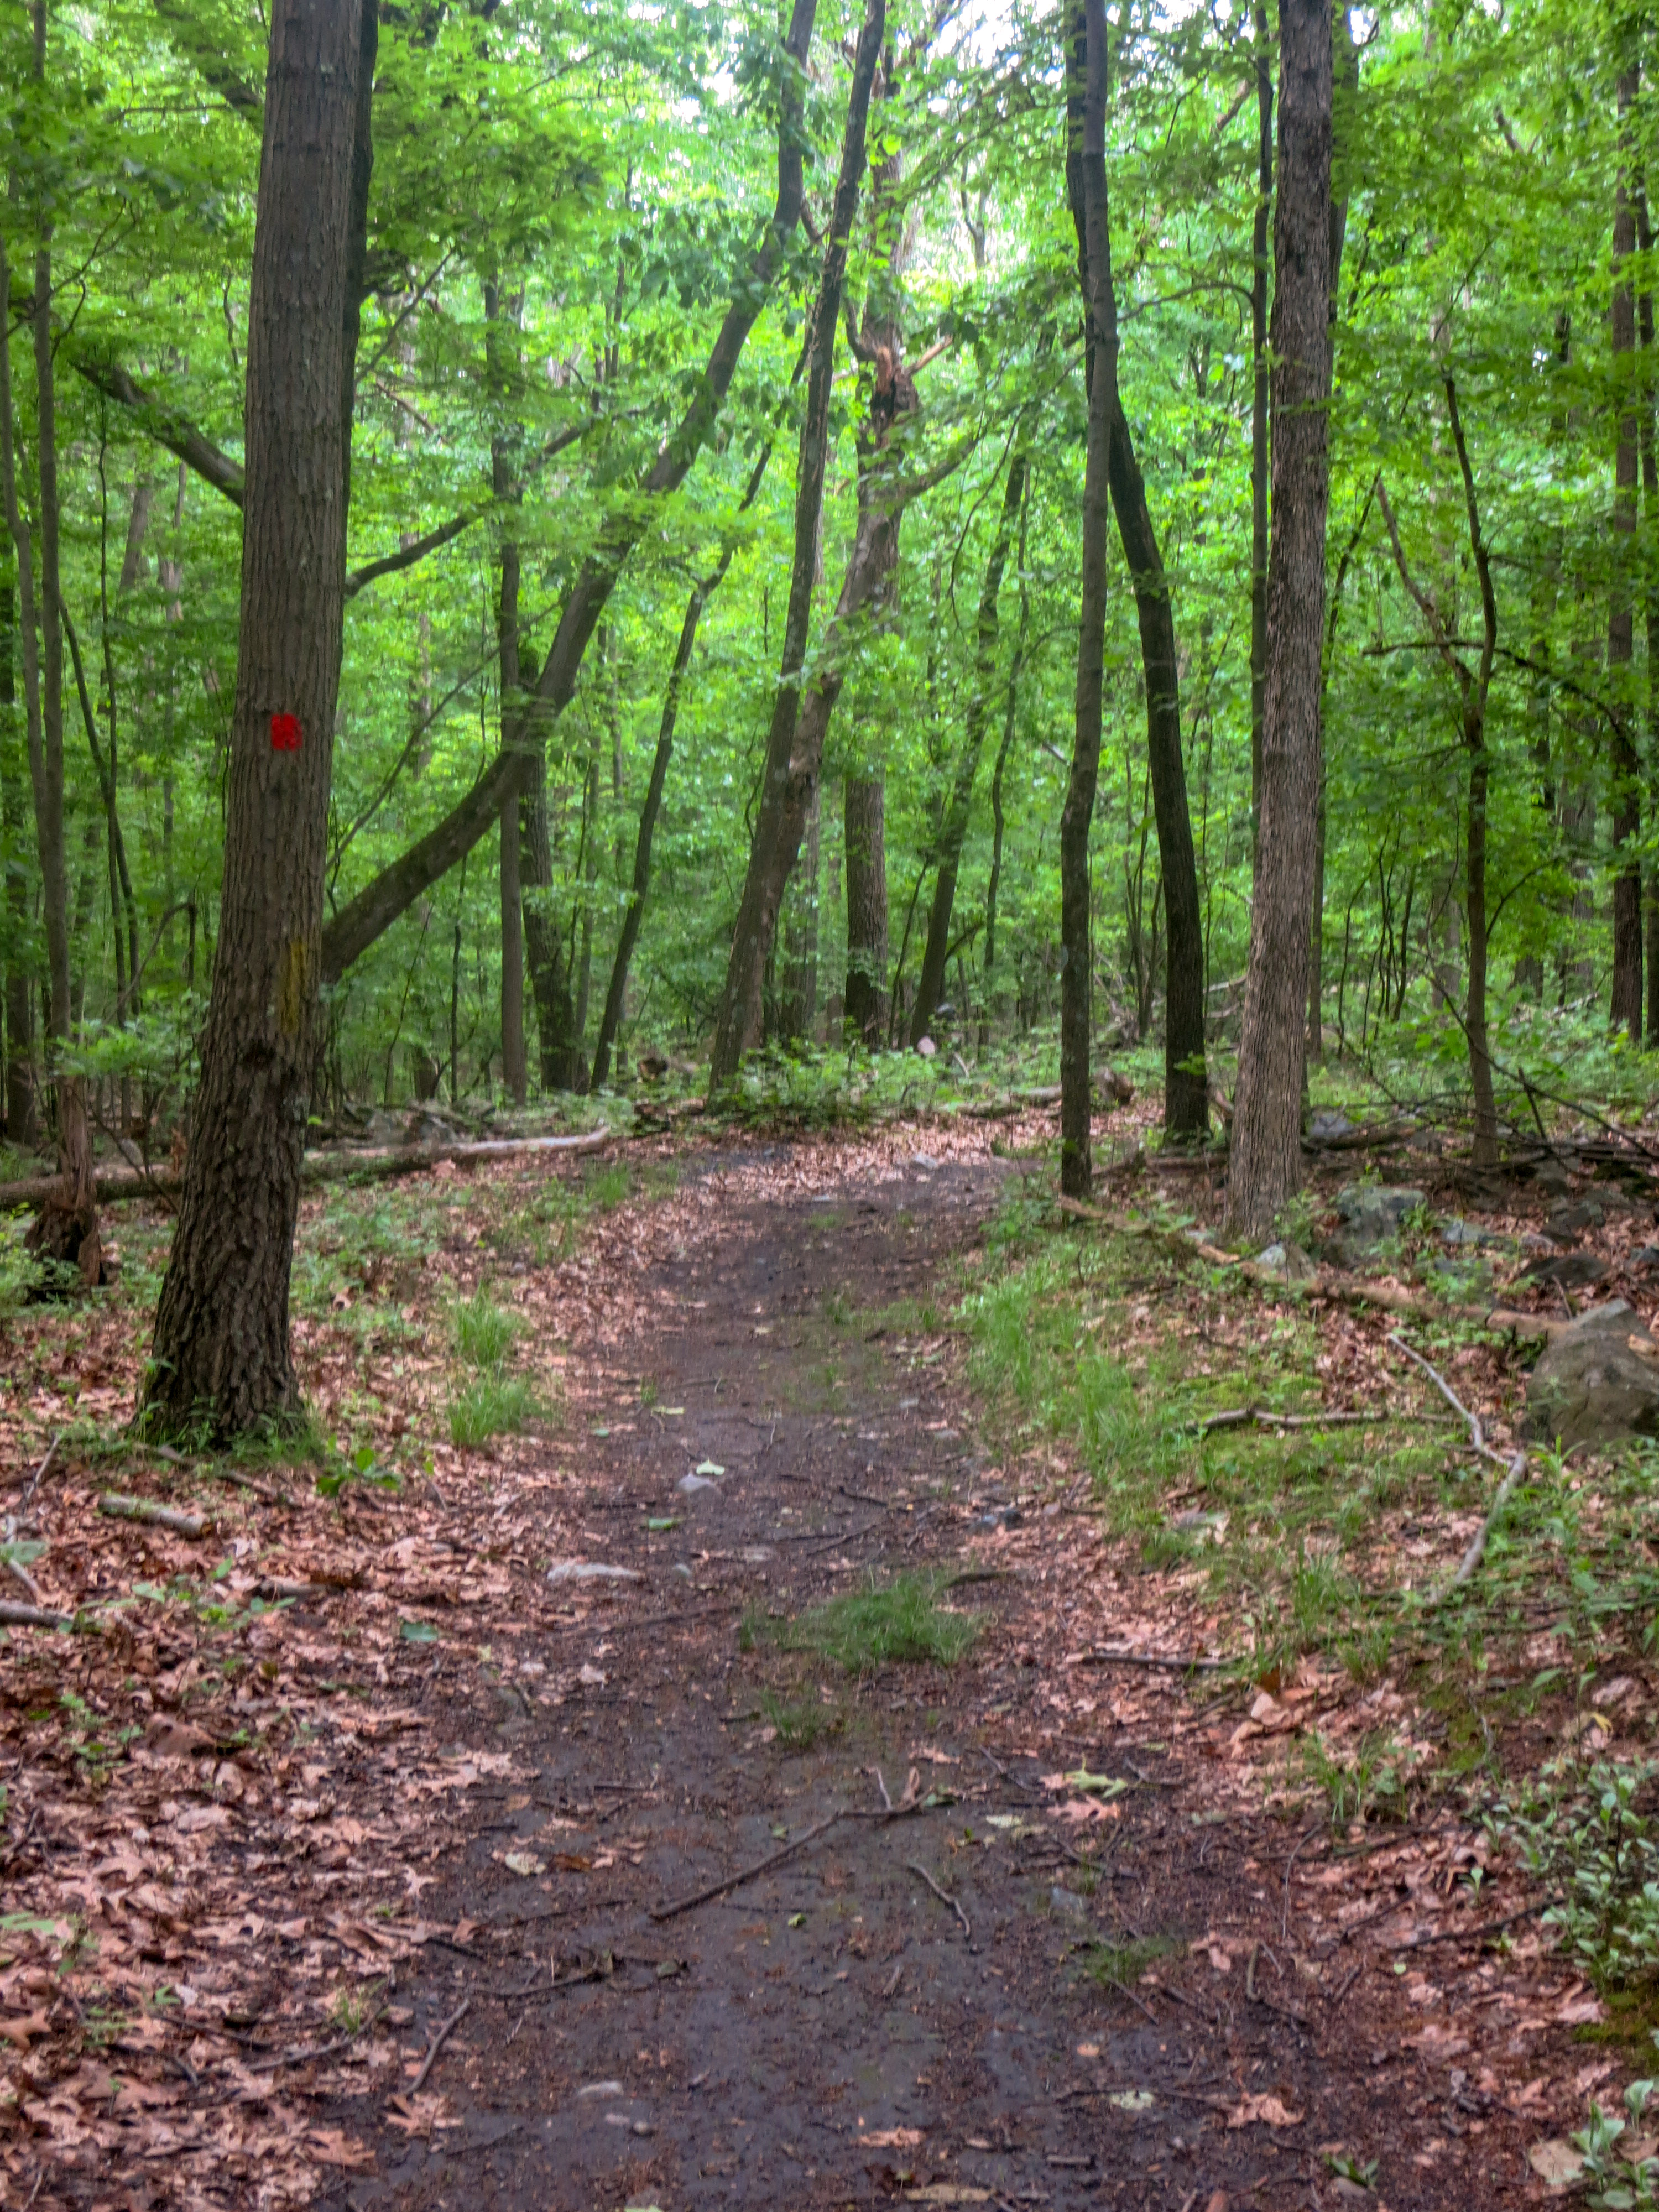 Along the Red Trail in Mount Hope Historical Park. Photo by Daniel Chazin.